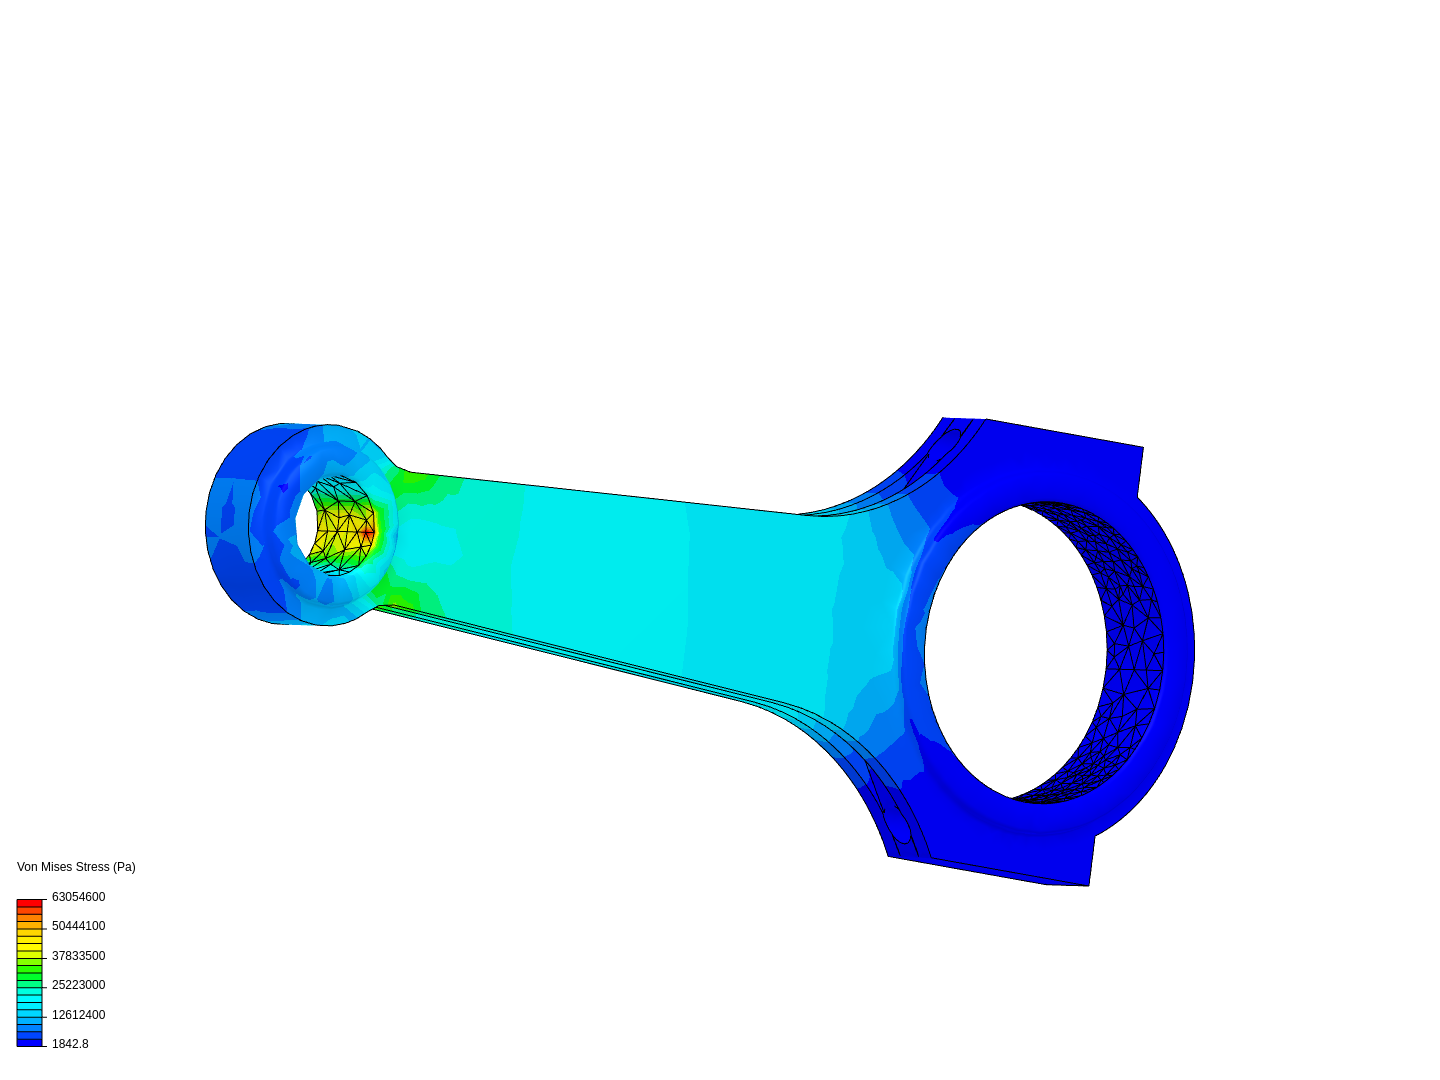 Connecting rod image